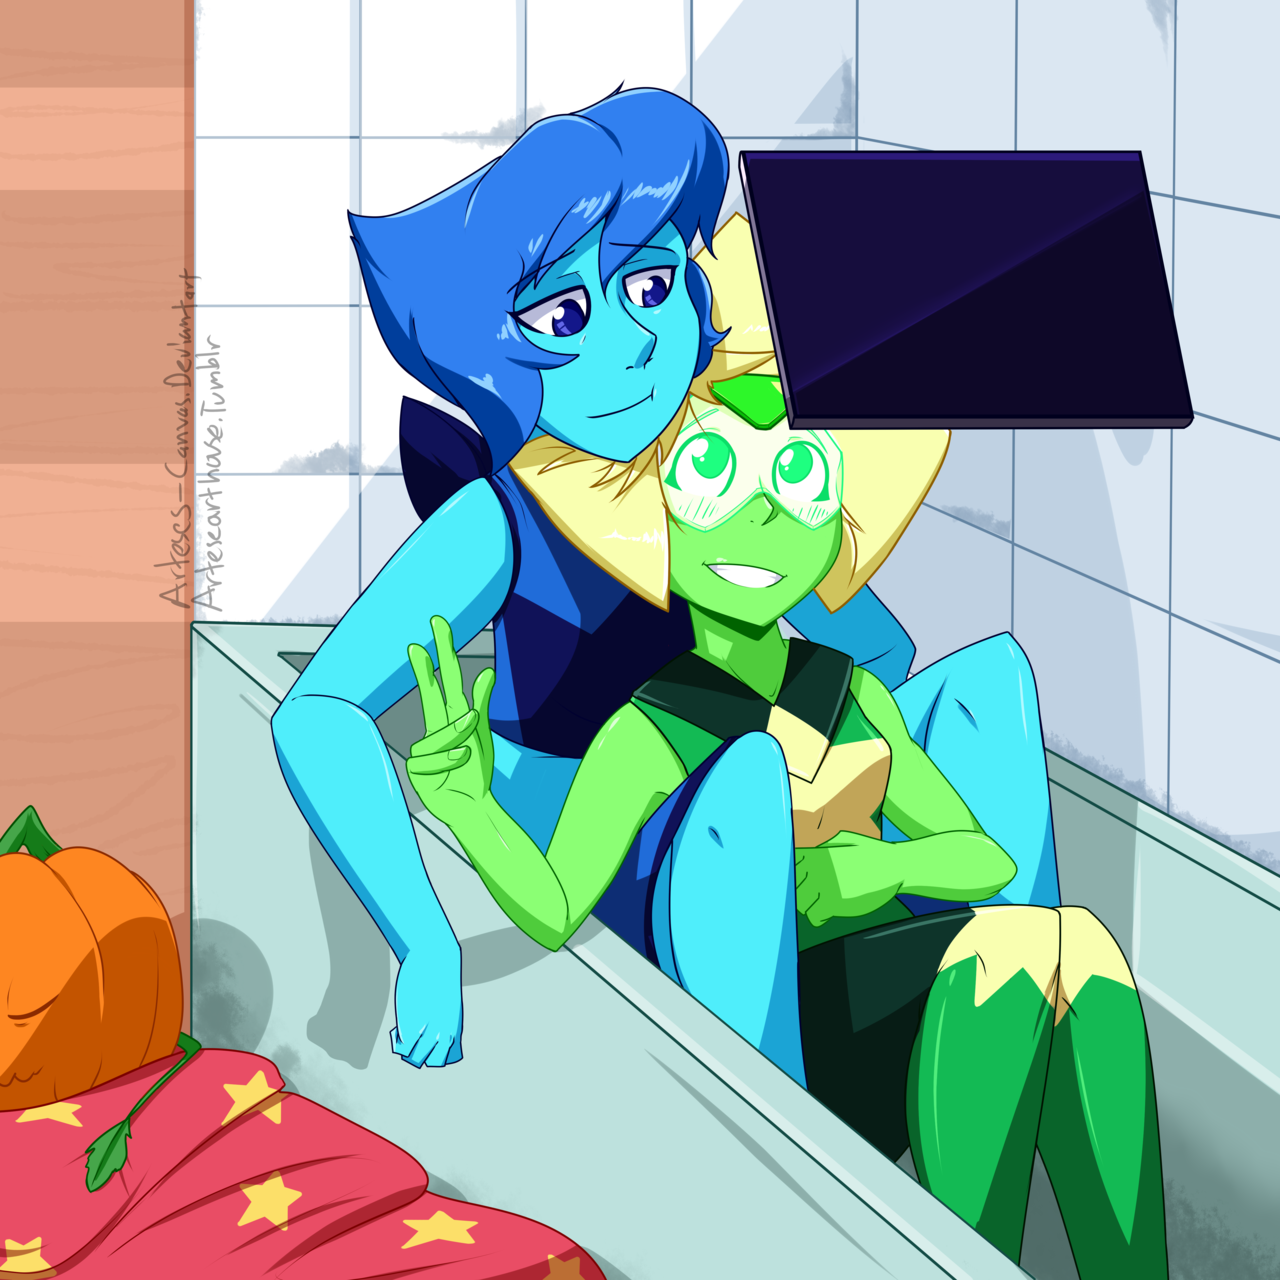 Tablet Tub Time Peridot likes to show Lapis funny videos in their spare time. https://www.deviantart.com/arteses-canvas